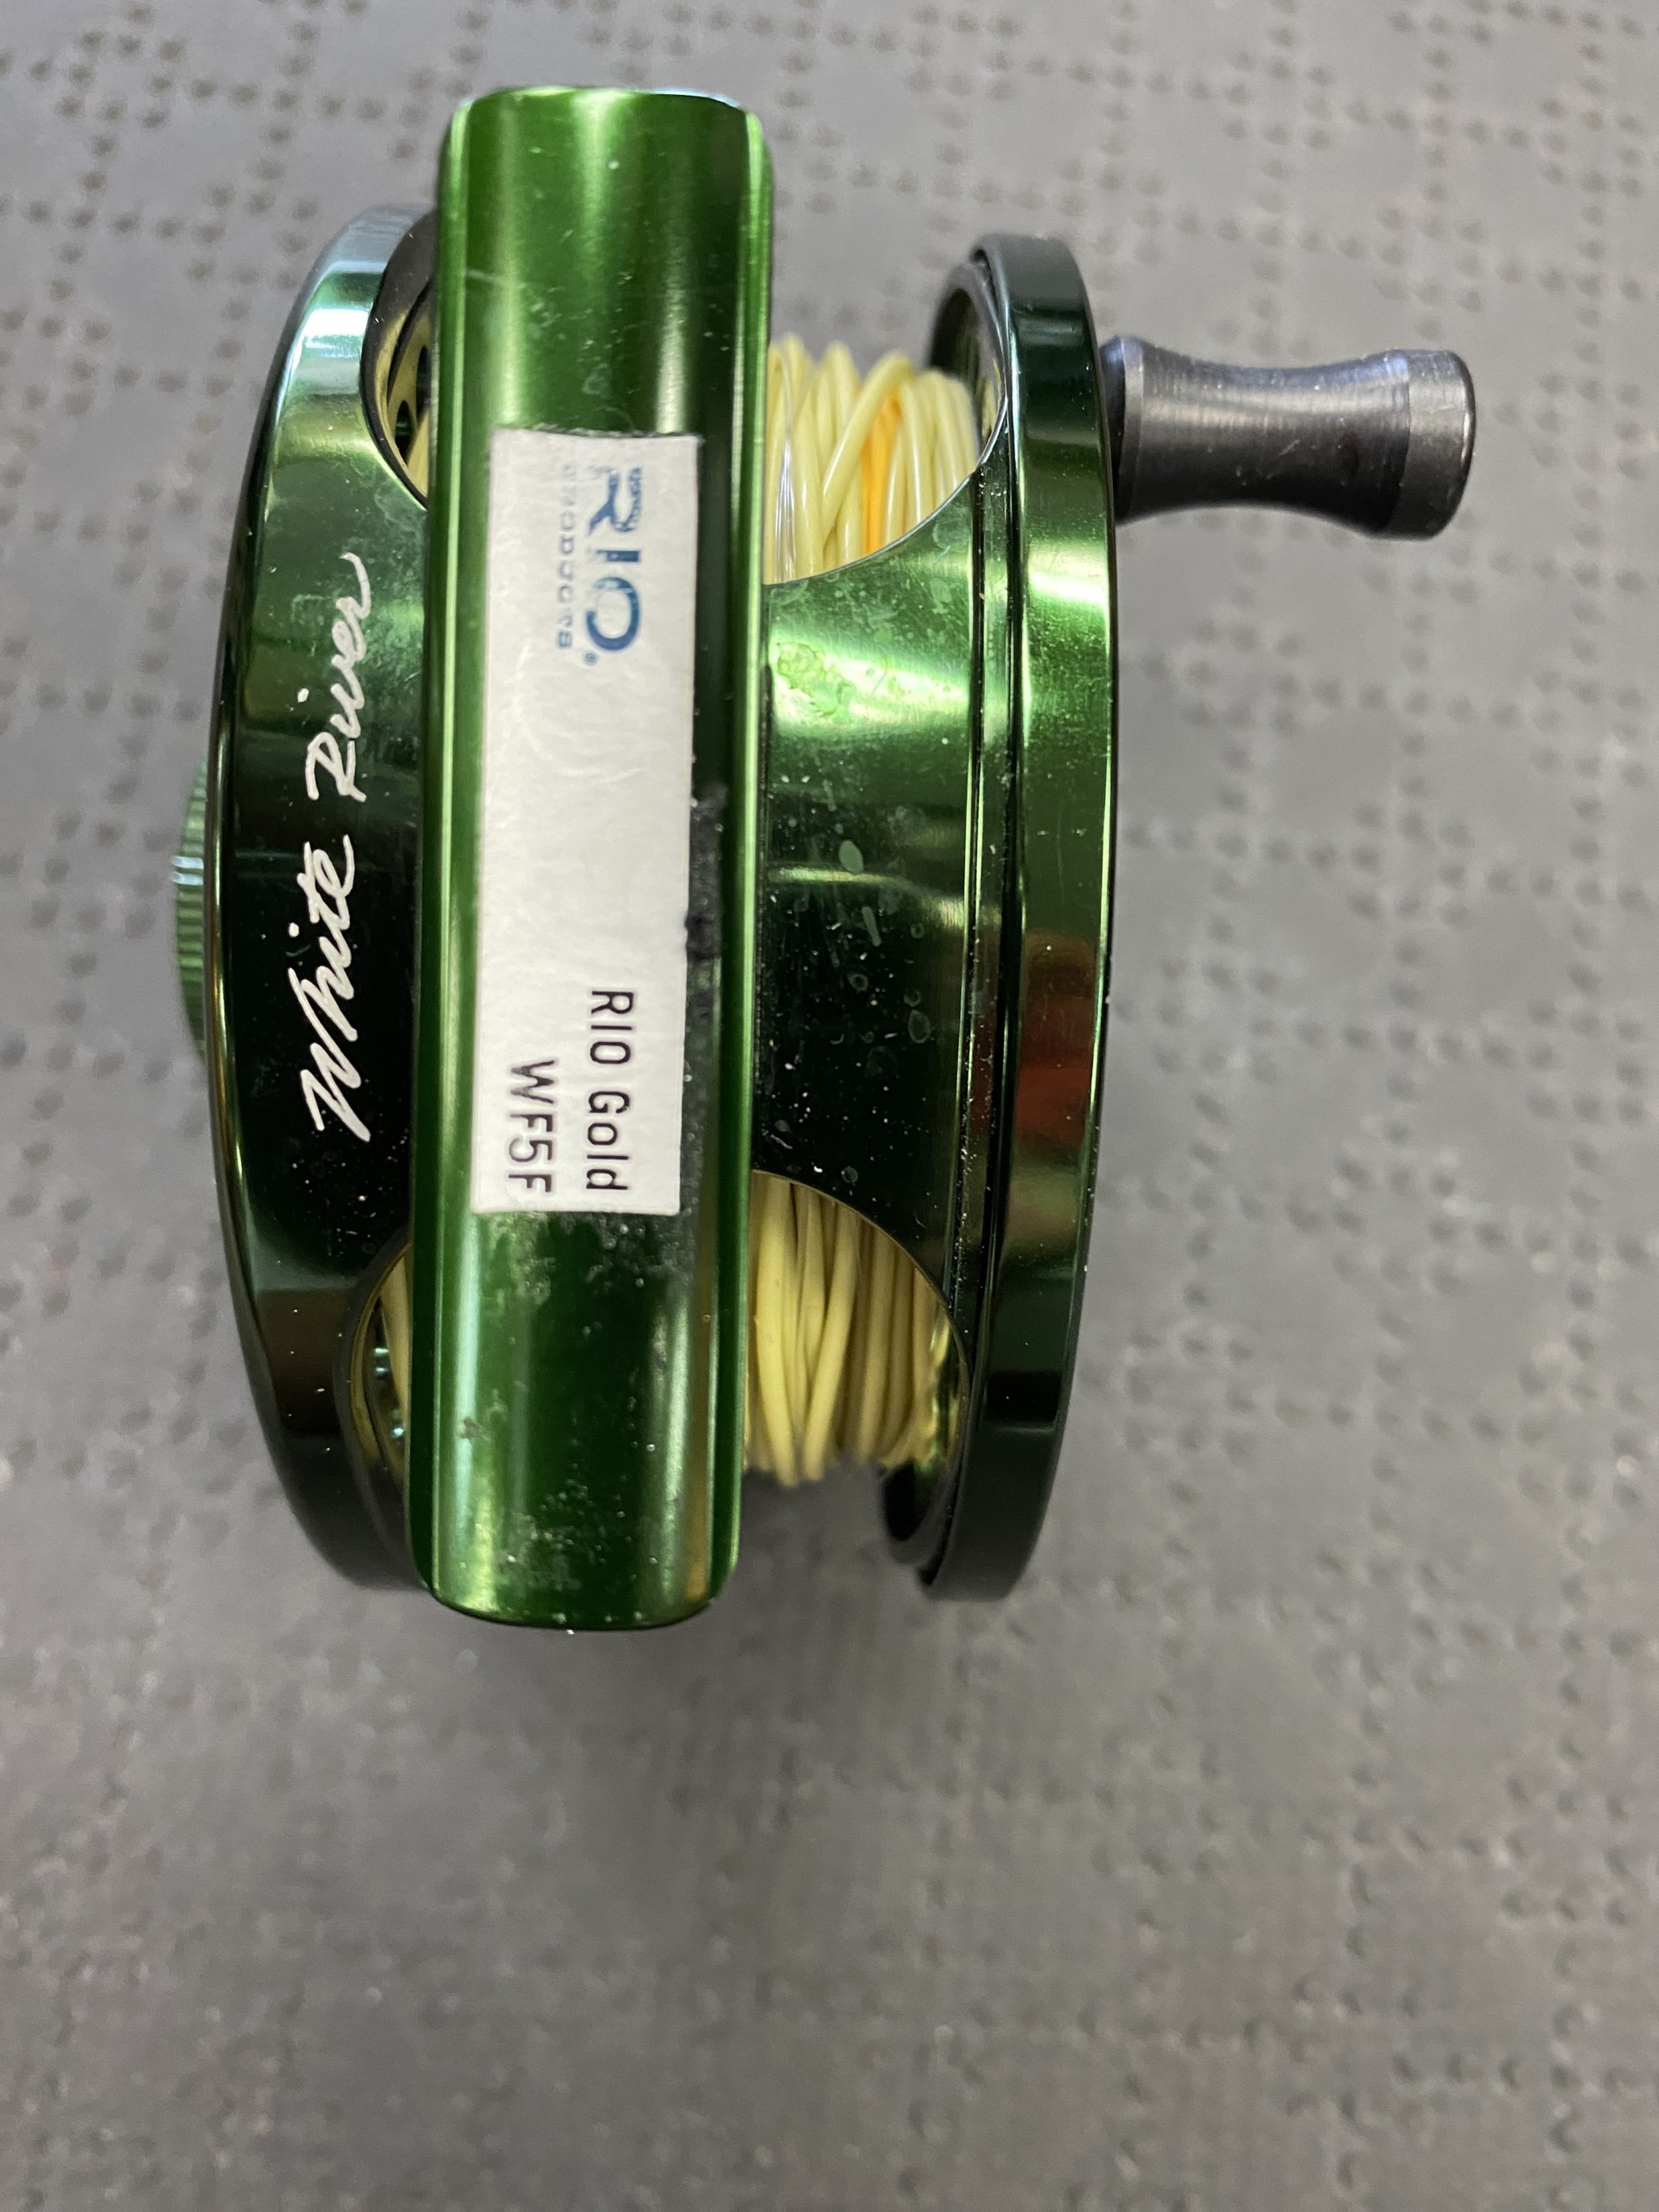 White River KFG56 Kingfisher Fly Reel - C/W RIO Gold WF5F Fly Line - LIKE NEW! - $125